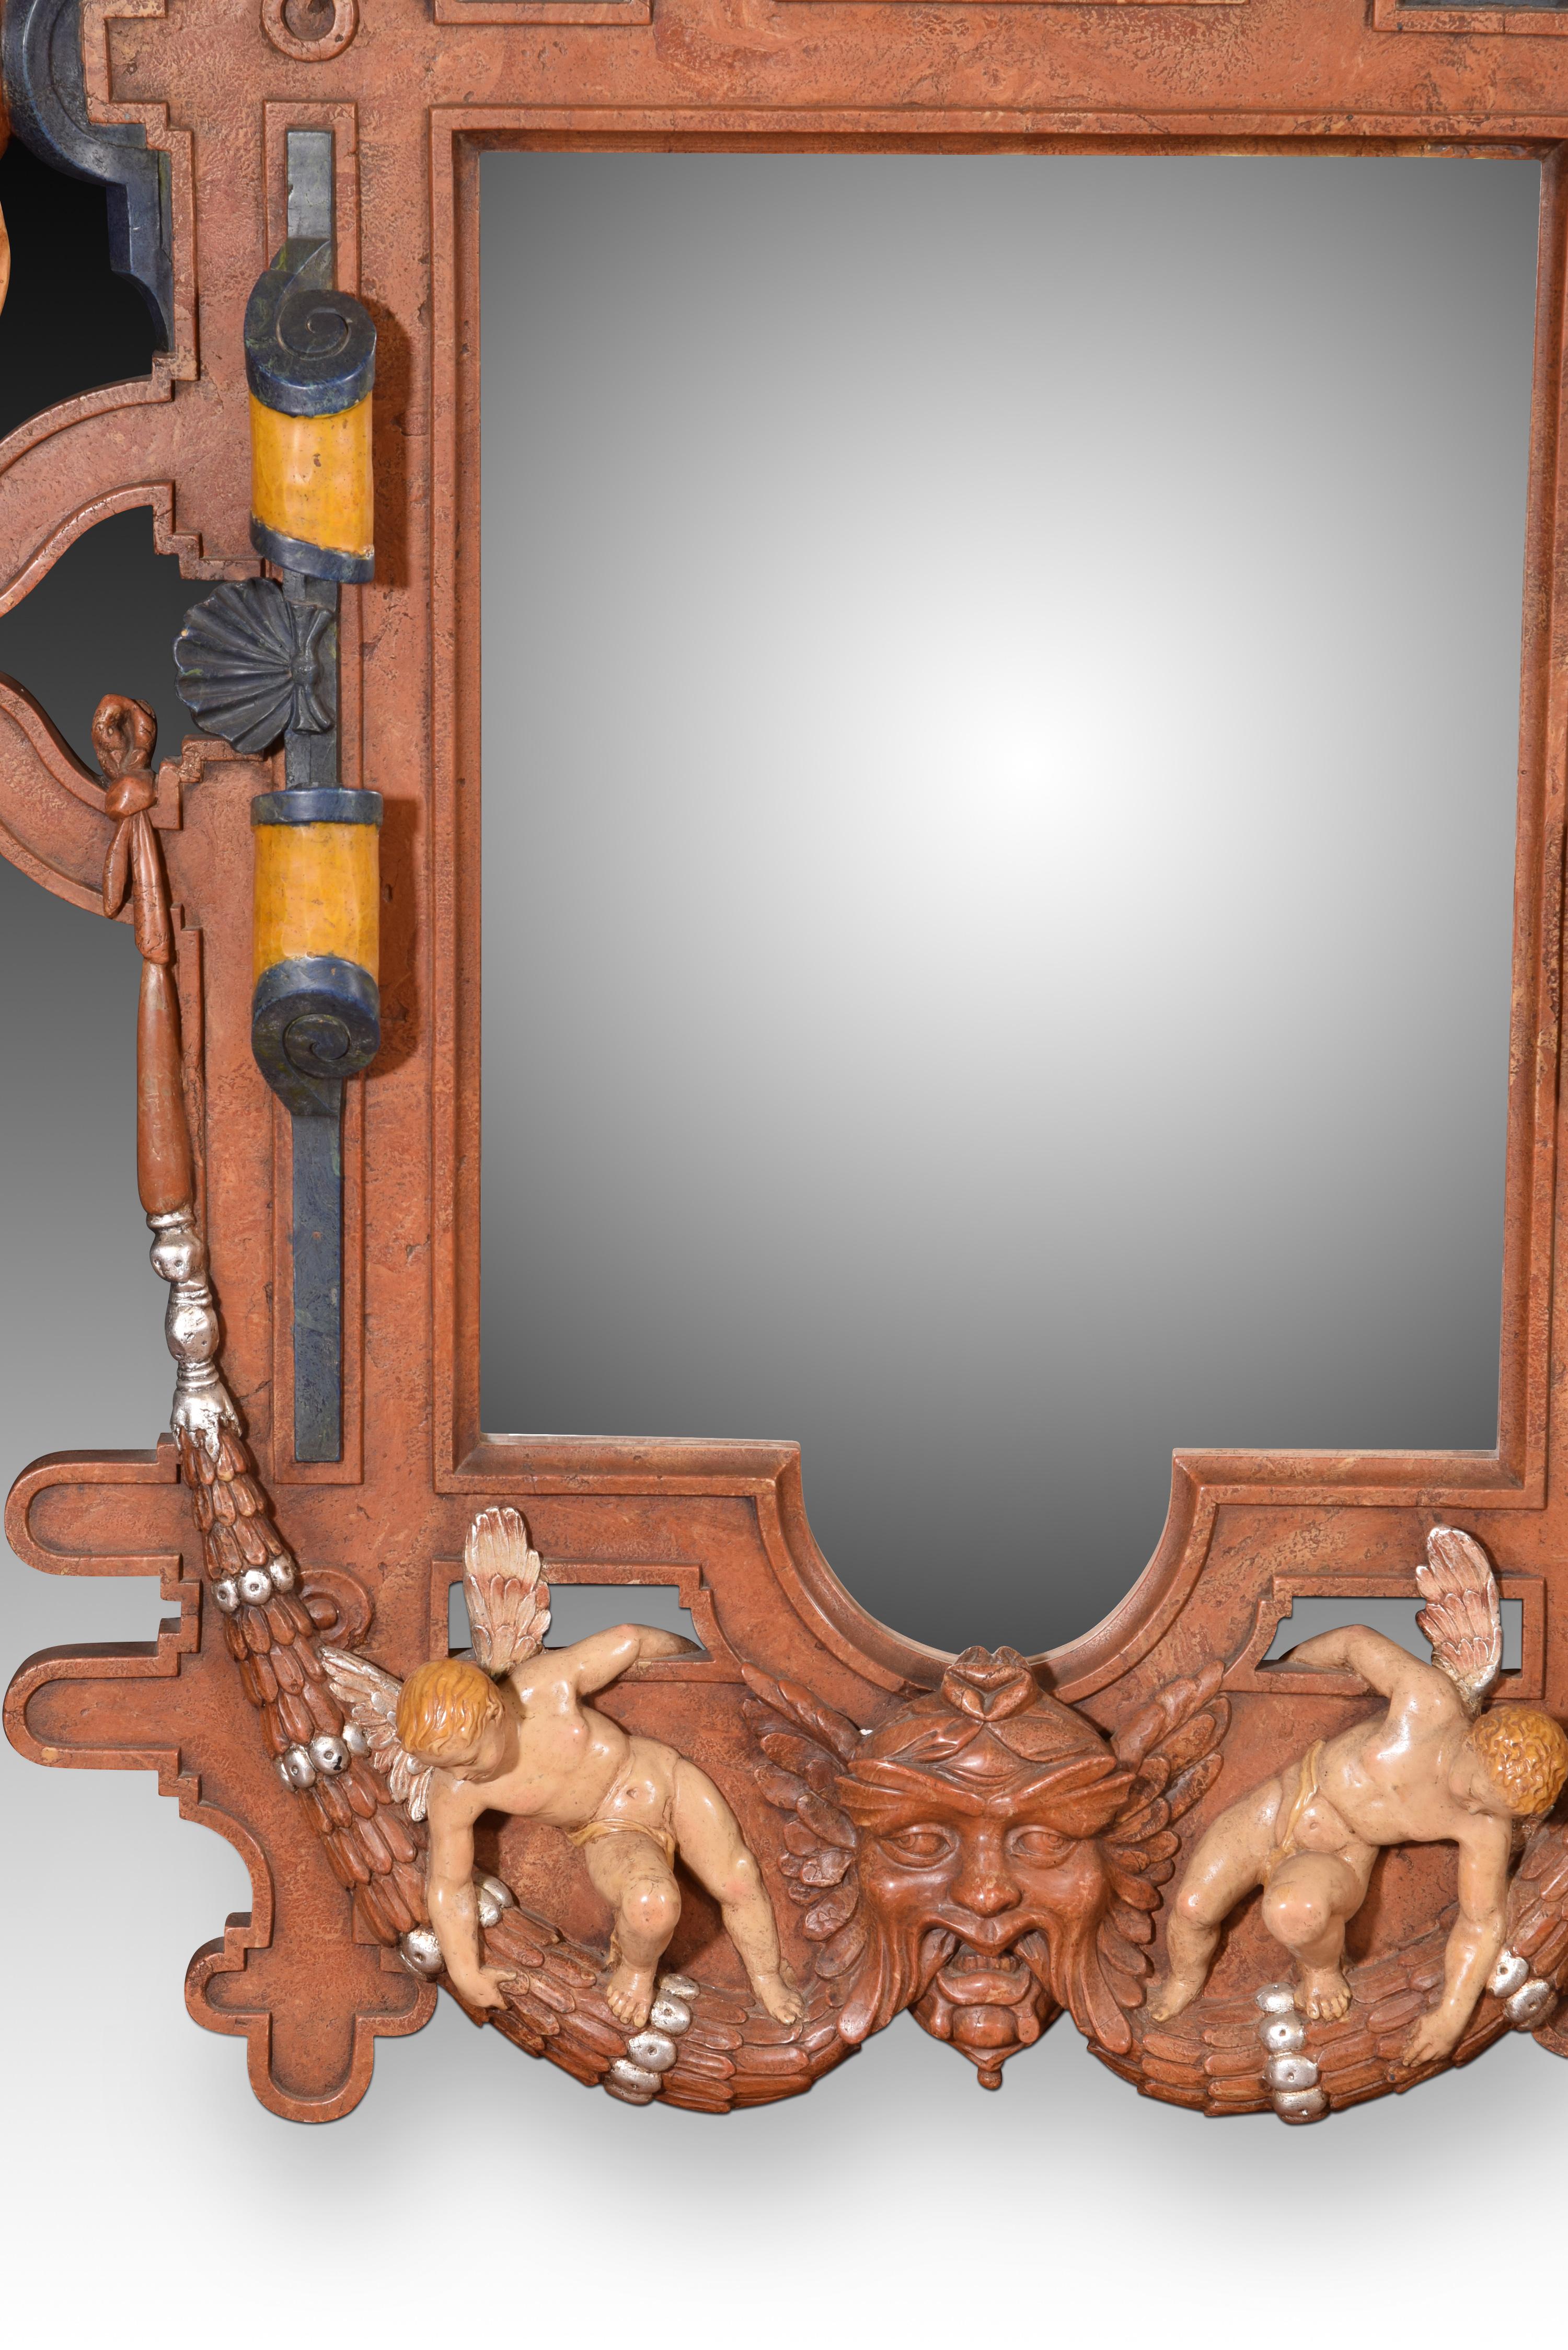 Mirror. Molded and polychrome alabaster. Twentieth century. 

Wall mirror made of alabaster molded with polychrome that has a frame of architectural elements of classicist influence and a series of figurative elements that respond to the same